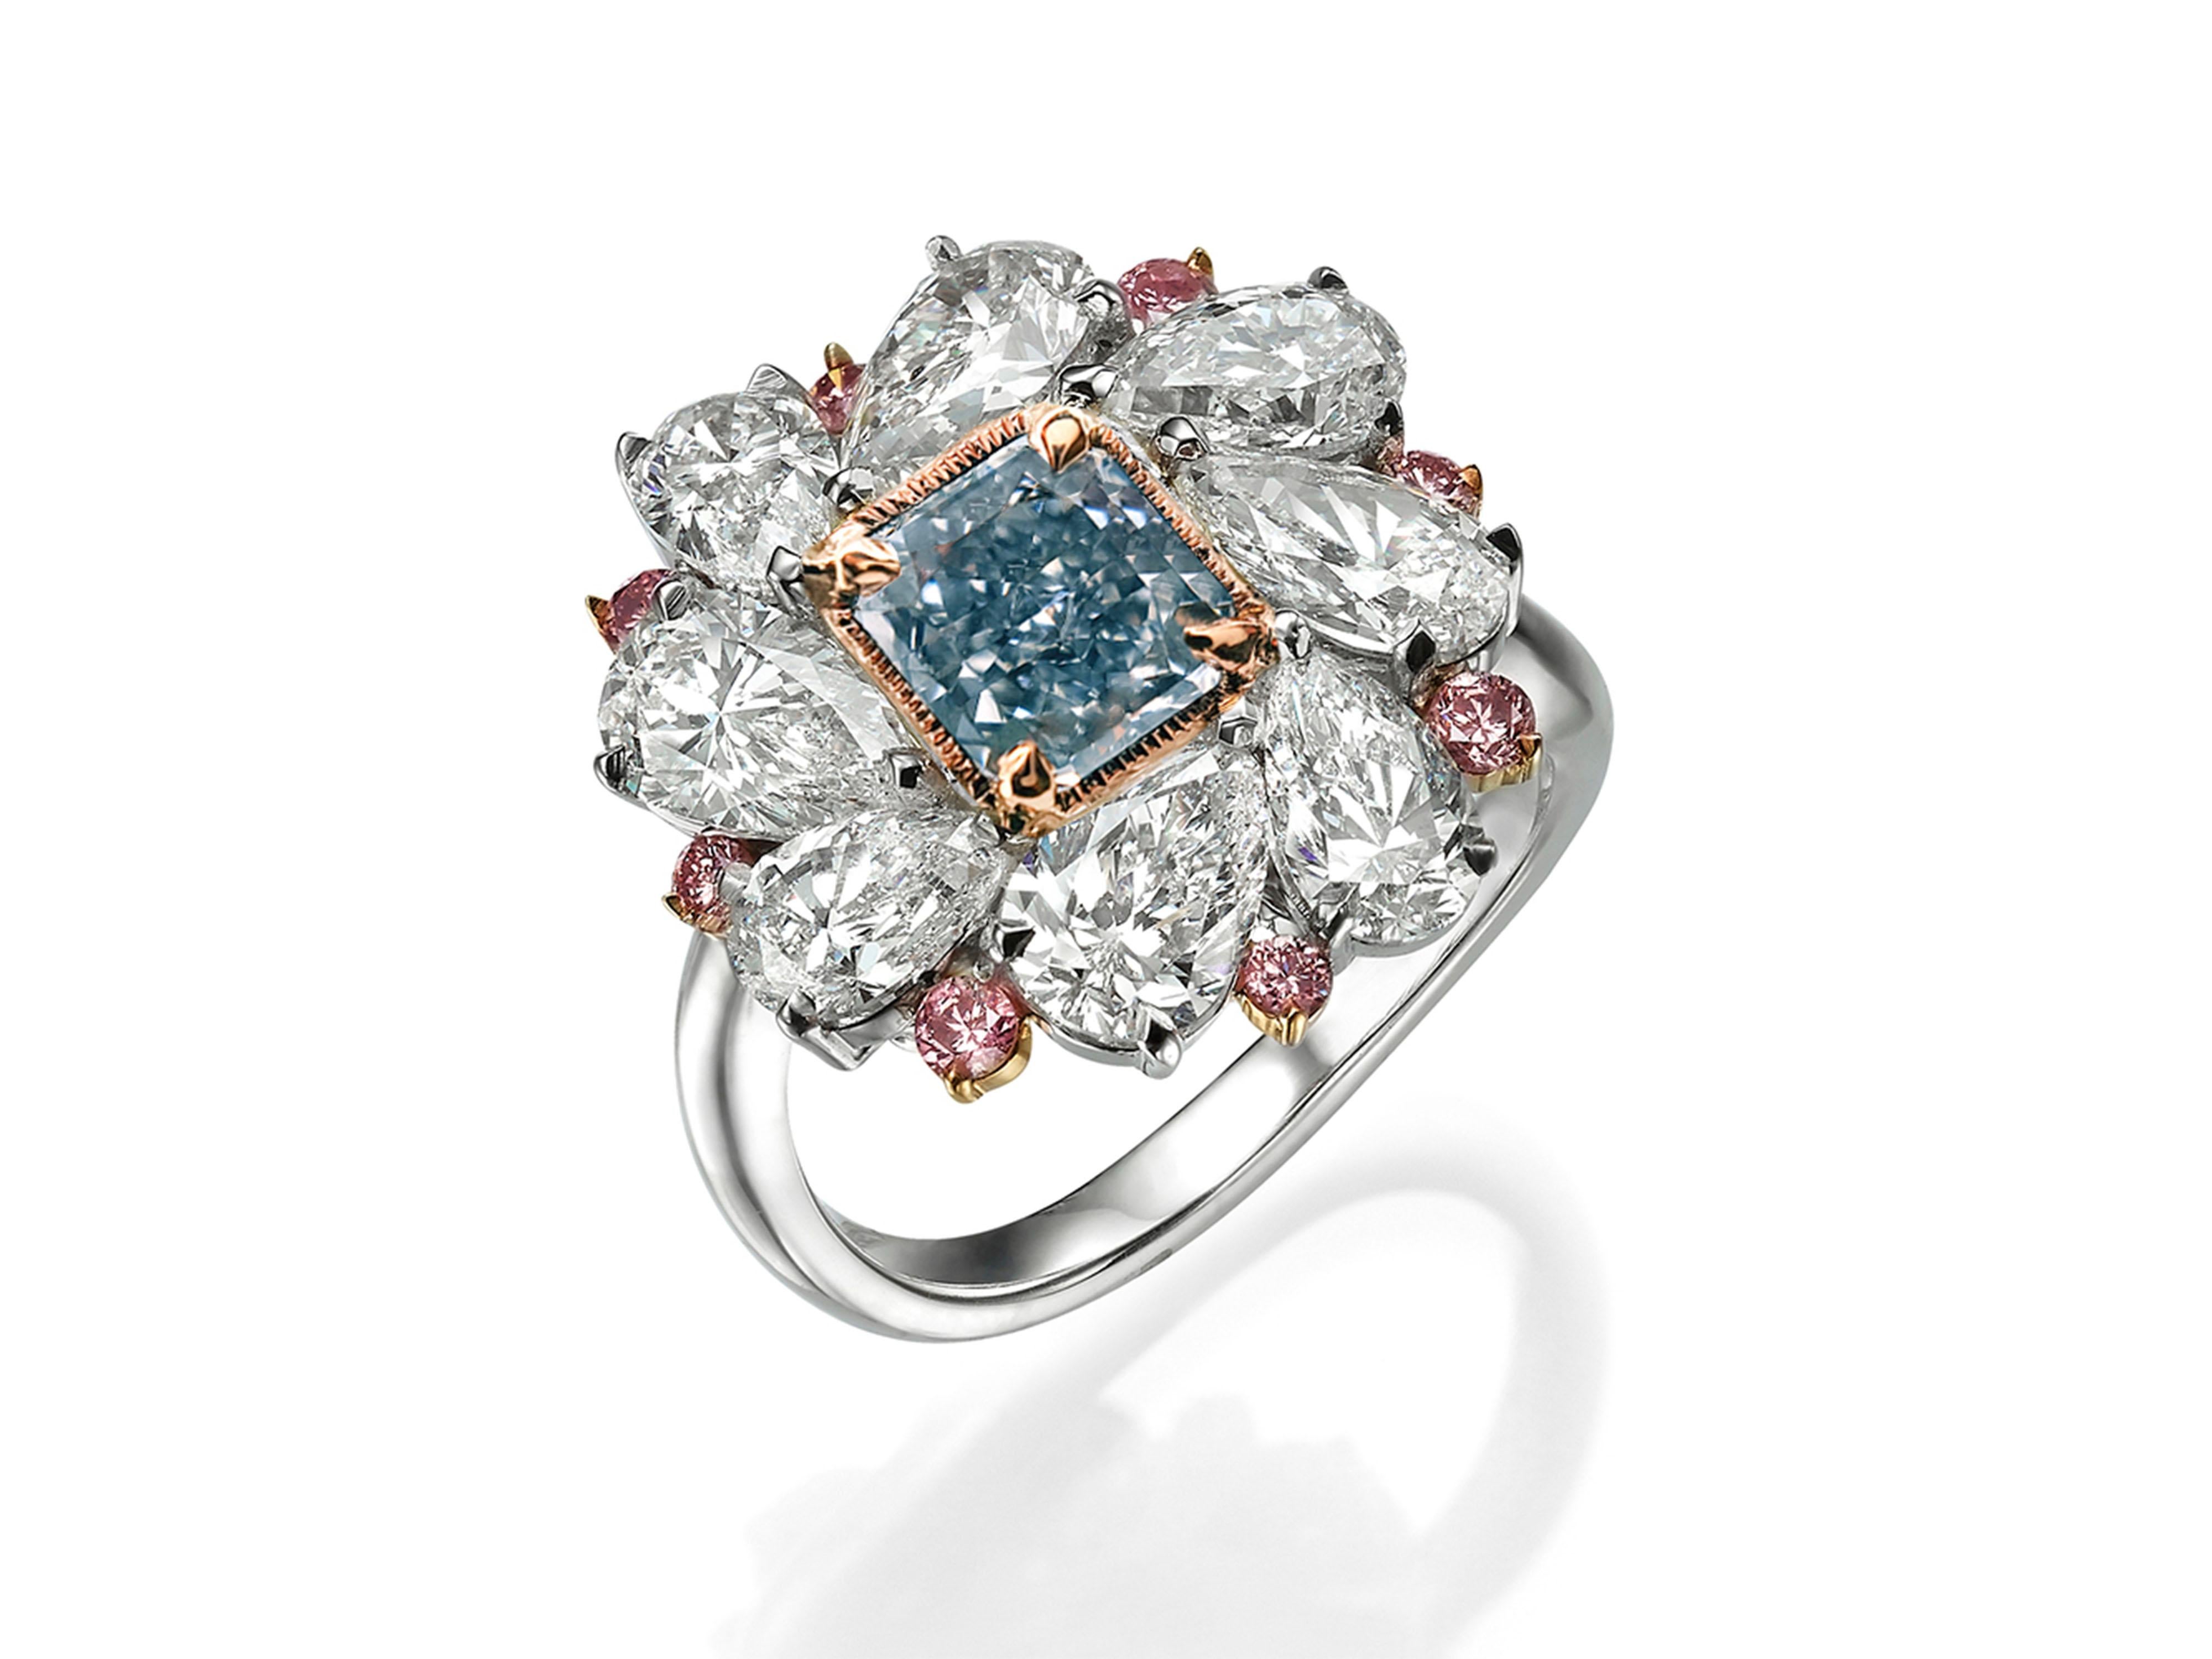 Women's 1 Carat Fancy Blue Diamond Cocktail Ring, GIA Certified For Sale